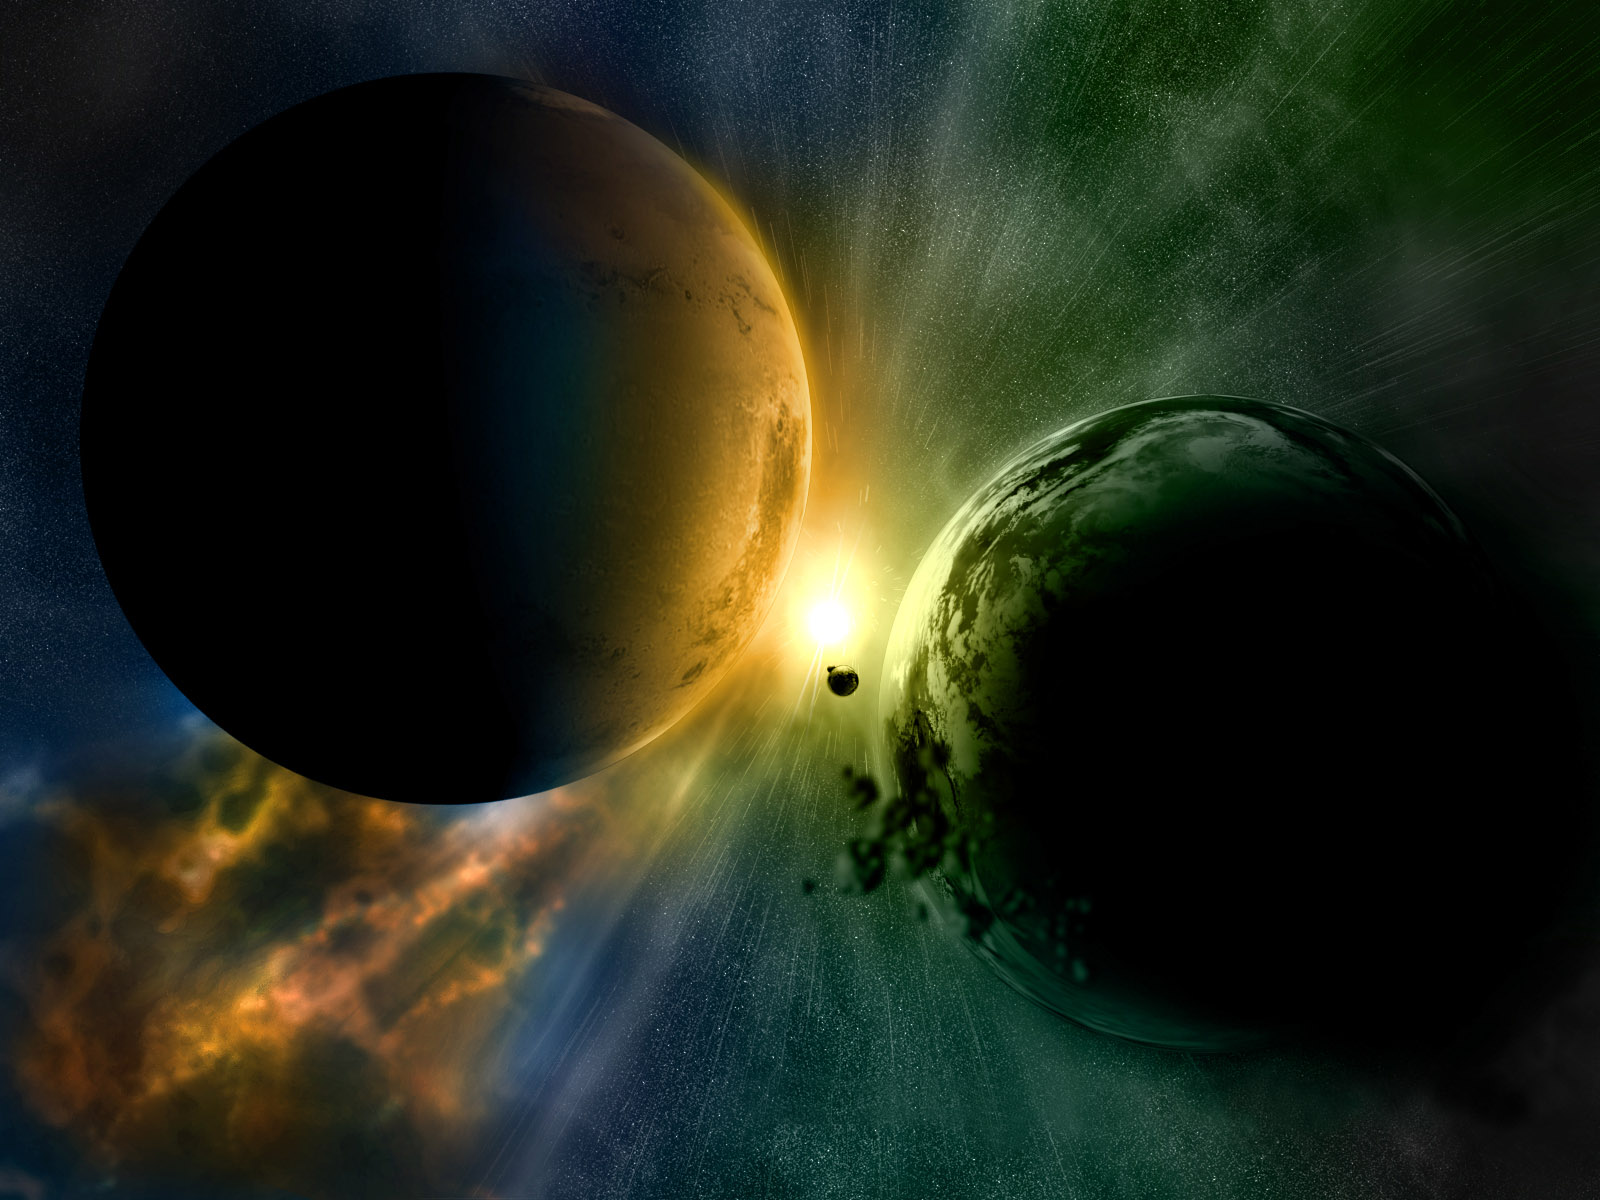 Download full size 3d Space wallpaper / 3d And Digital Art / 1600x1200